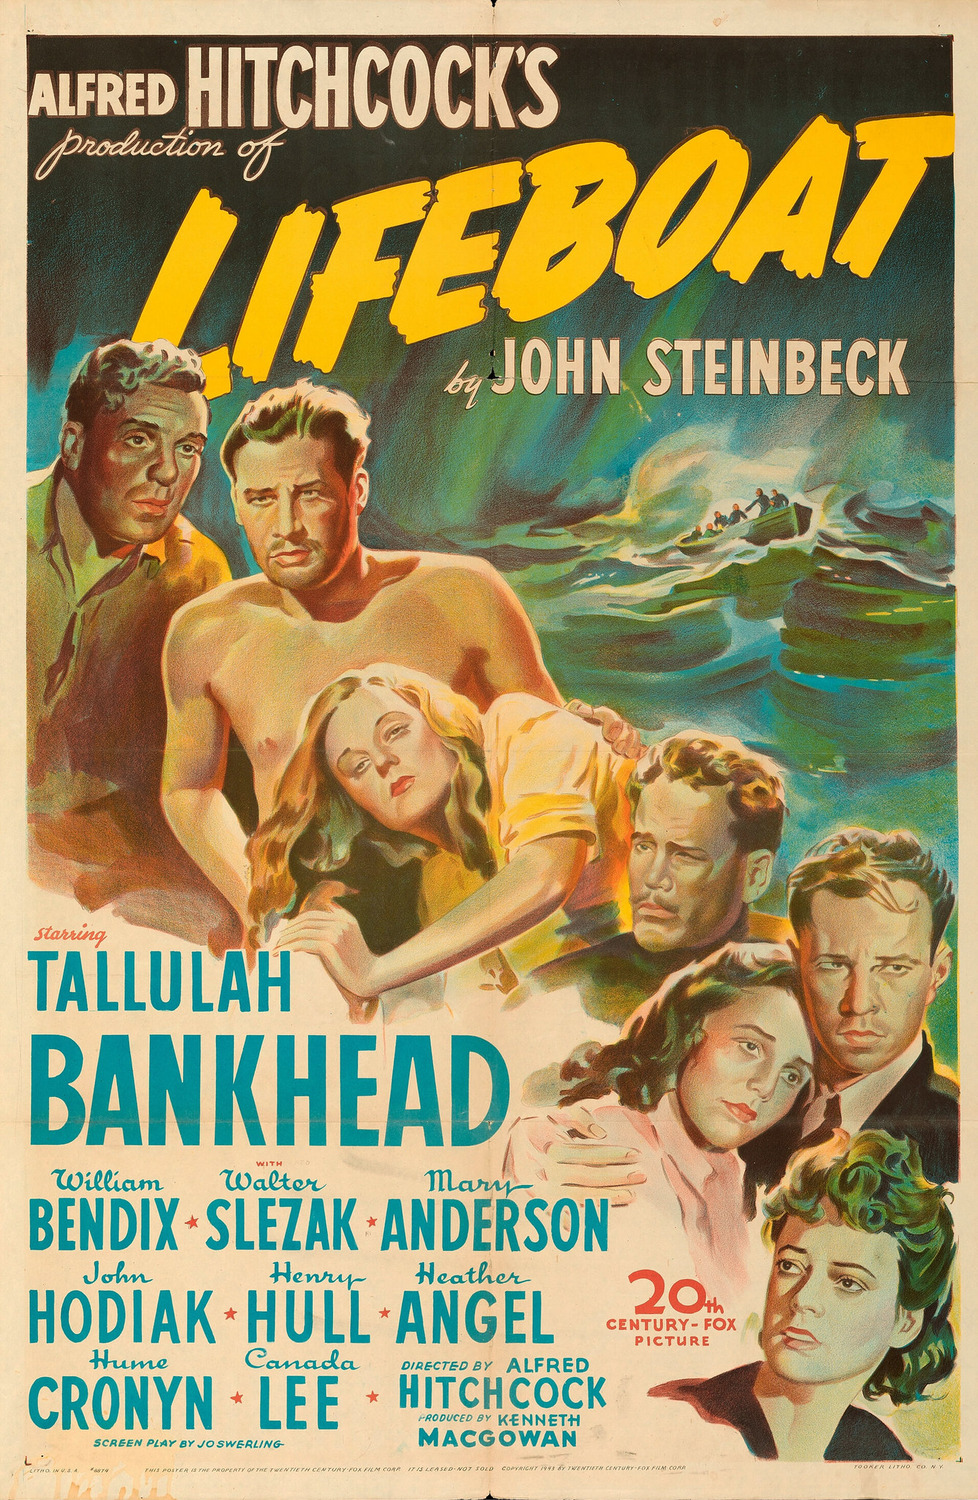 Extra Large Movie Poster Image for Lifeboat 